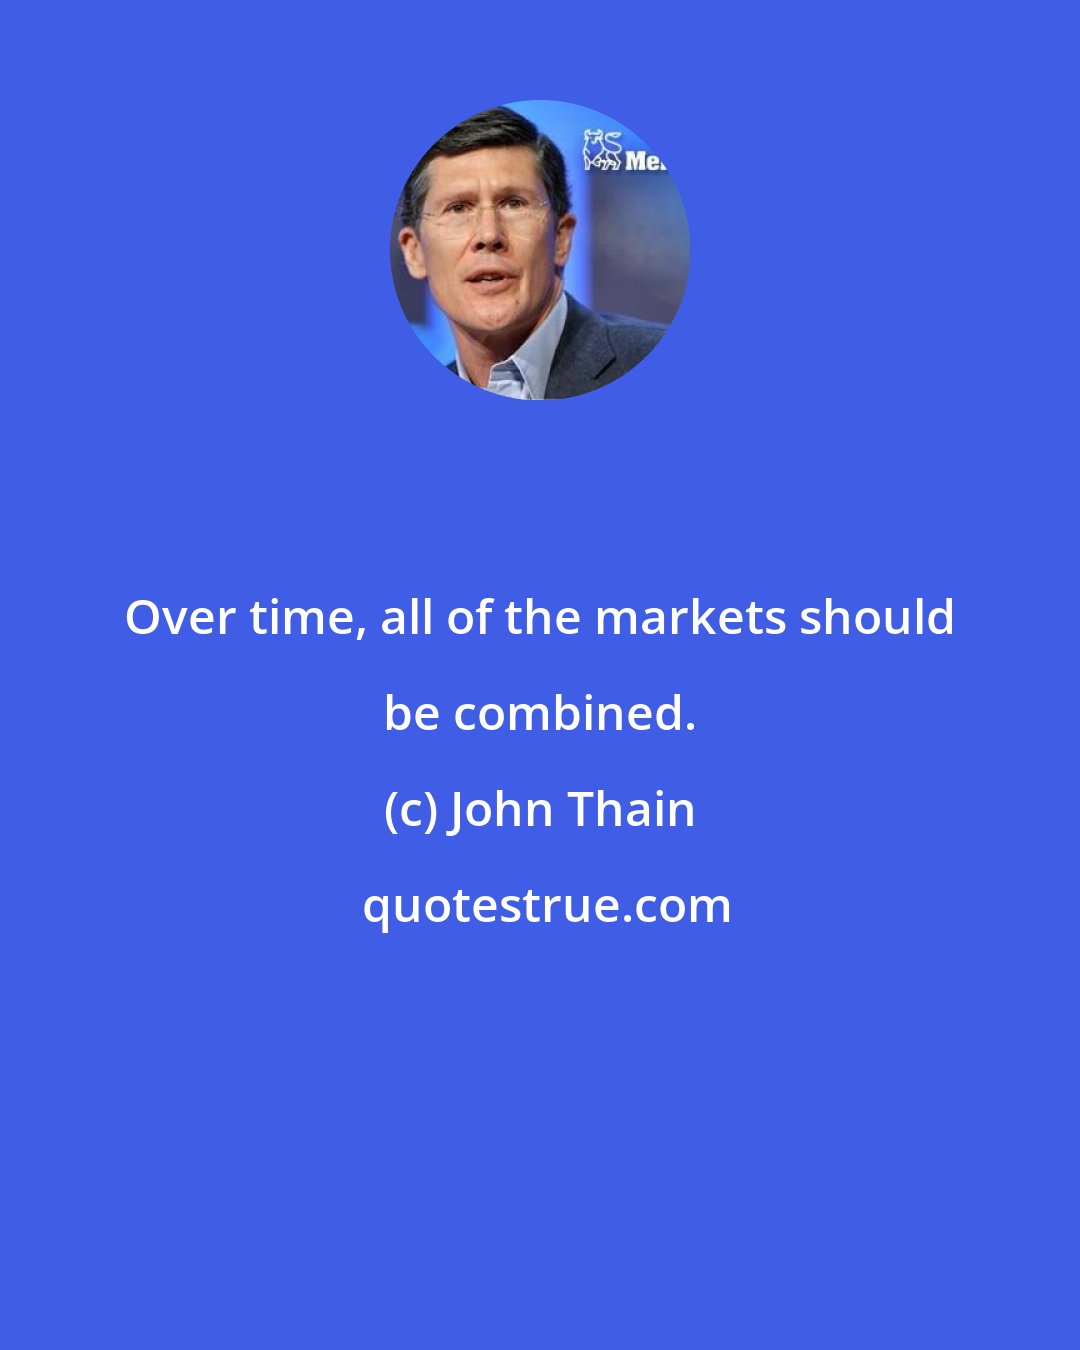 John Thain: Over time, all of the markets should be combined.